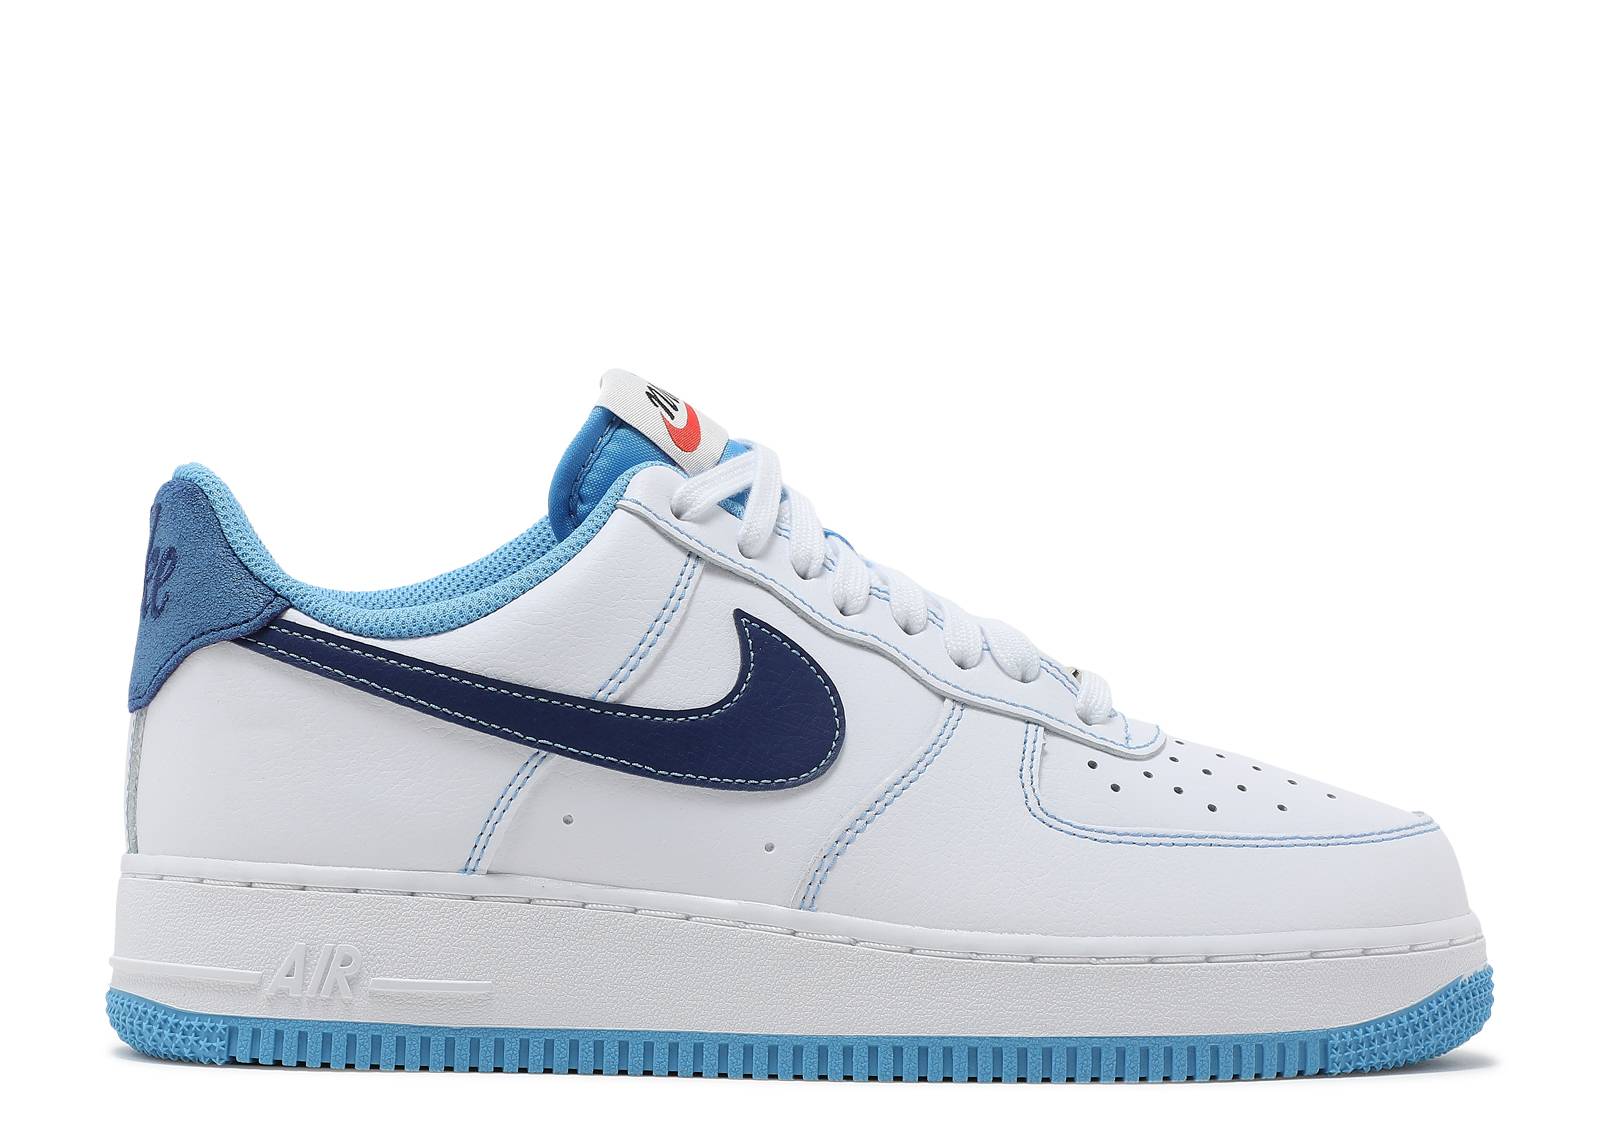 Air Force 1 '07 'First Use - White University Blue'